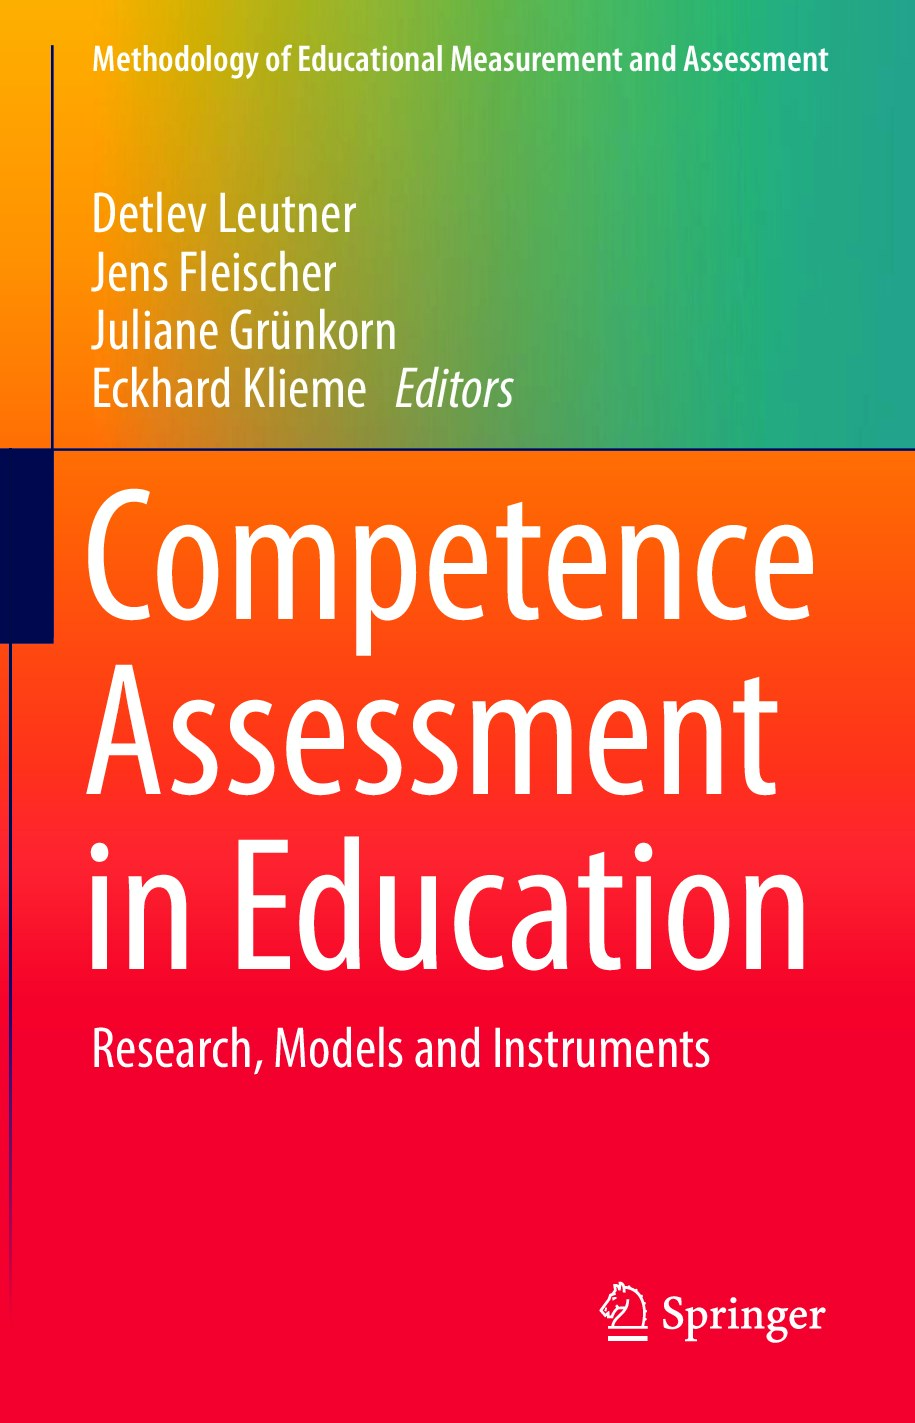 Competence Assessment in Education_ Research, Models and Instruments, 2017